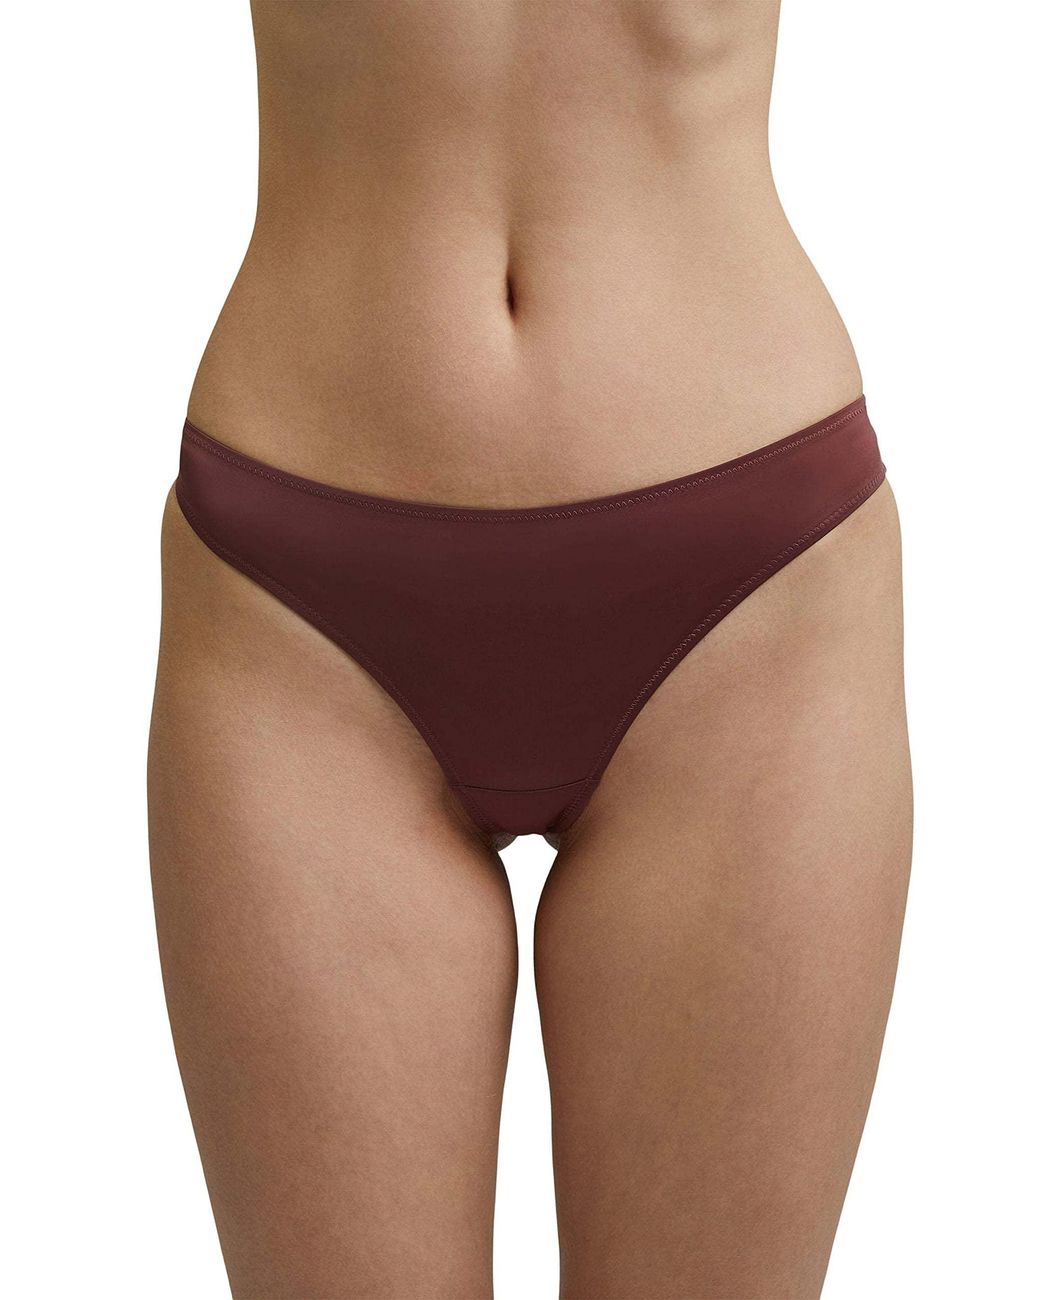 Esprit Broome Fashion Hipster String Rouge Dark Red 610 Femme Taille Fabricant: 38 40